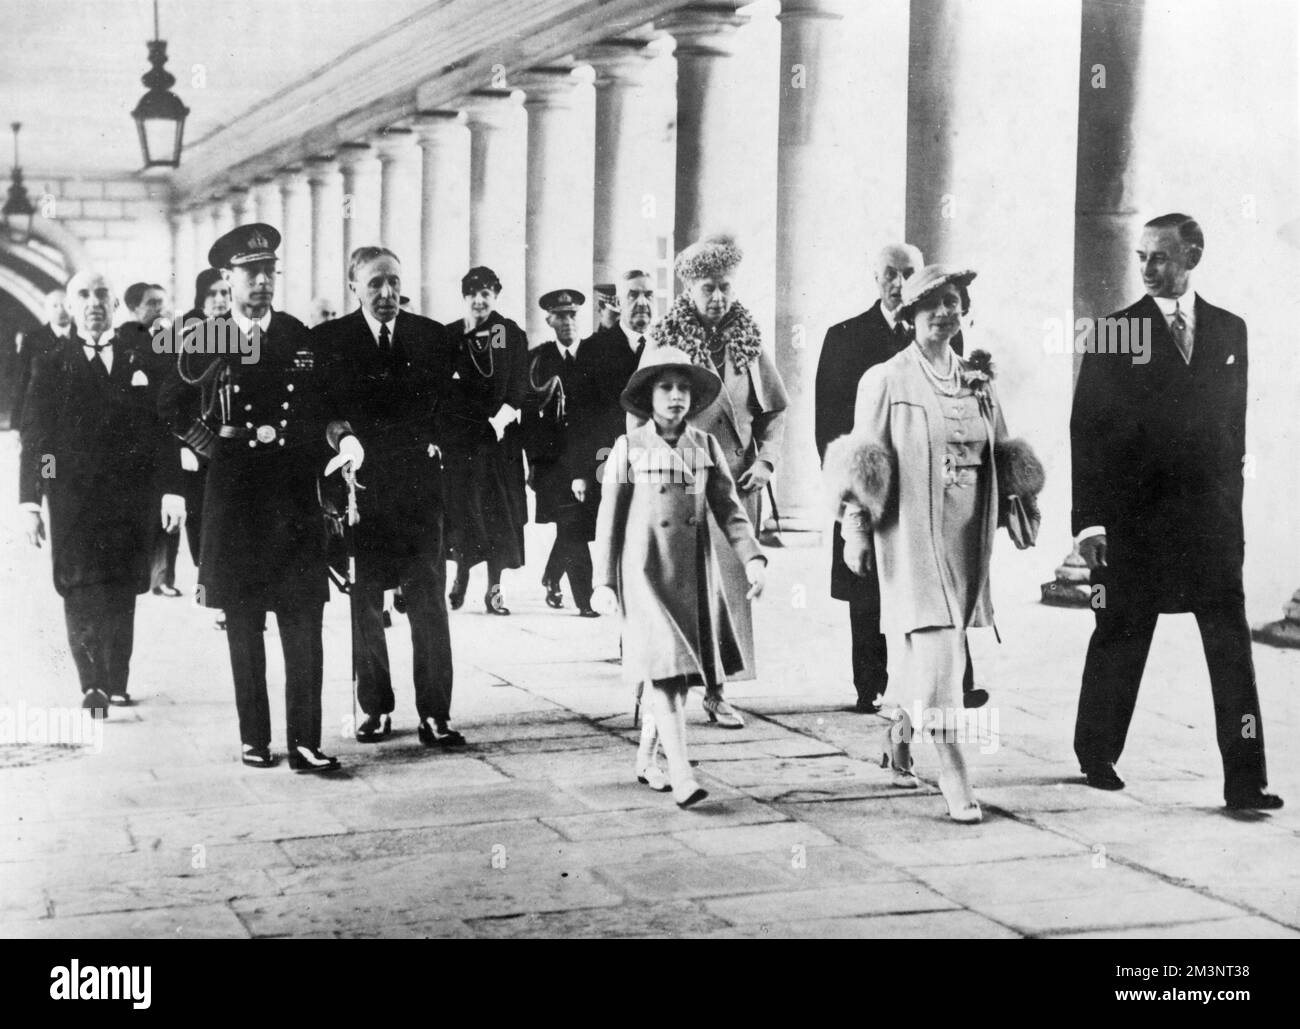 King George VI, Queen Elizabeth, Princess Elizabeth (later Queen Elizabeth II) and Queen Mary arriving at the National Maritime Museum in Greenwich, south east London, for its official opening on 27 April 1937.  They had travelled there by barge on the River Thames.      Date: 1937 Stock Photo